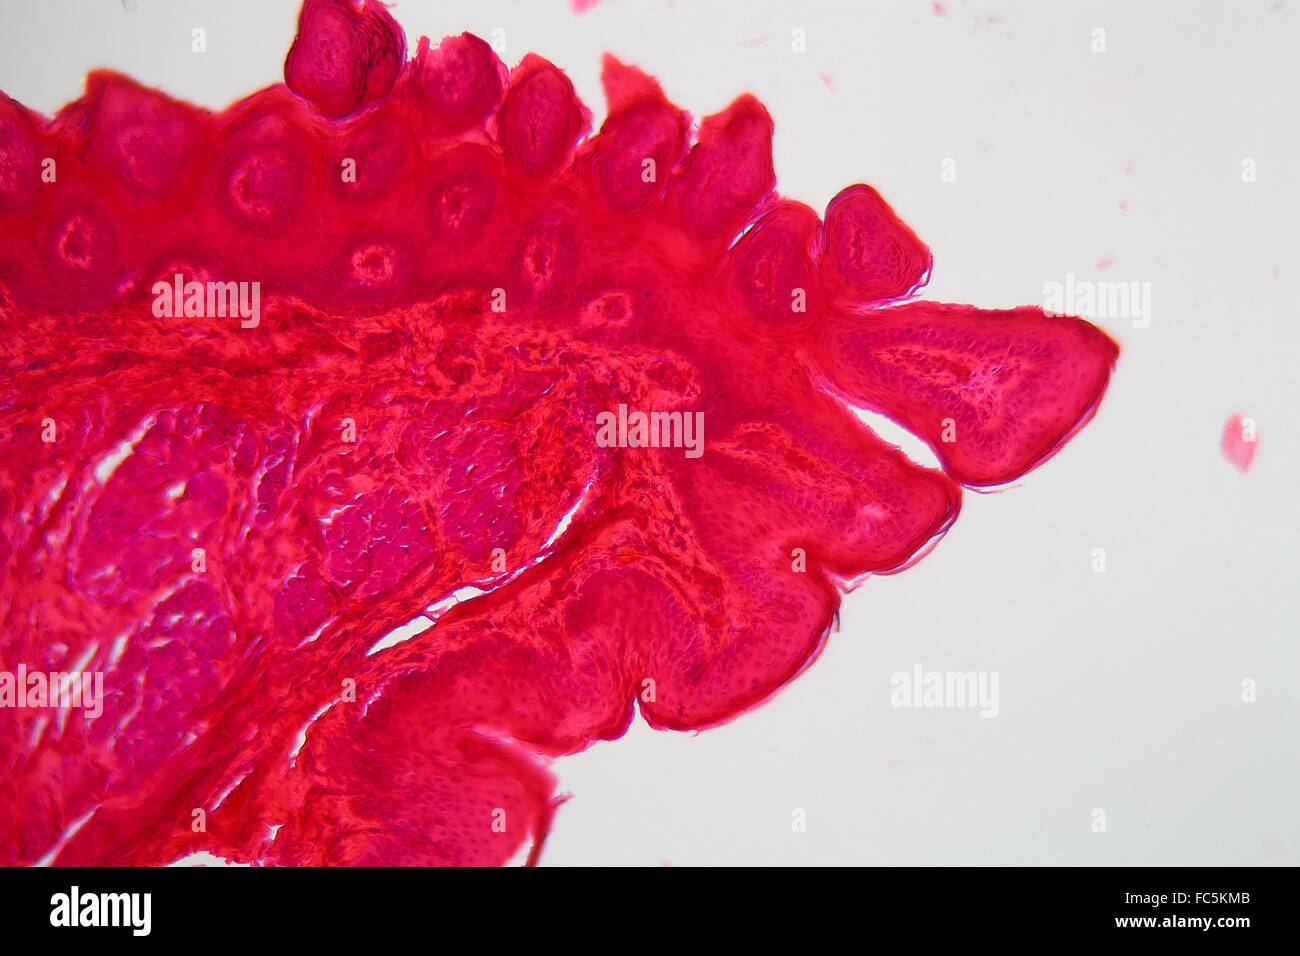 Tip of a tongue under the microscope Stock Photo